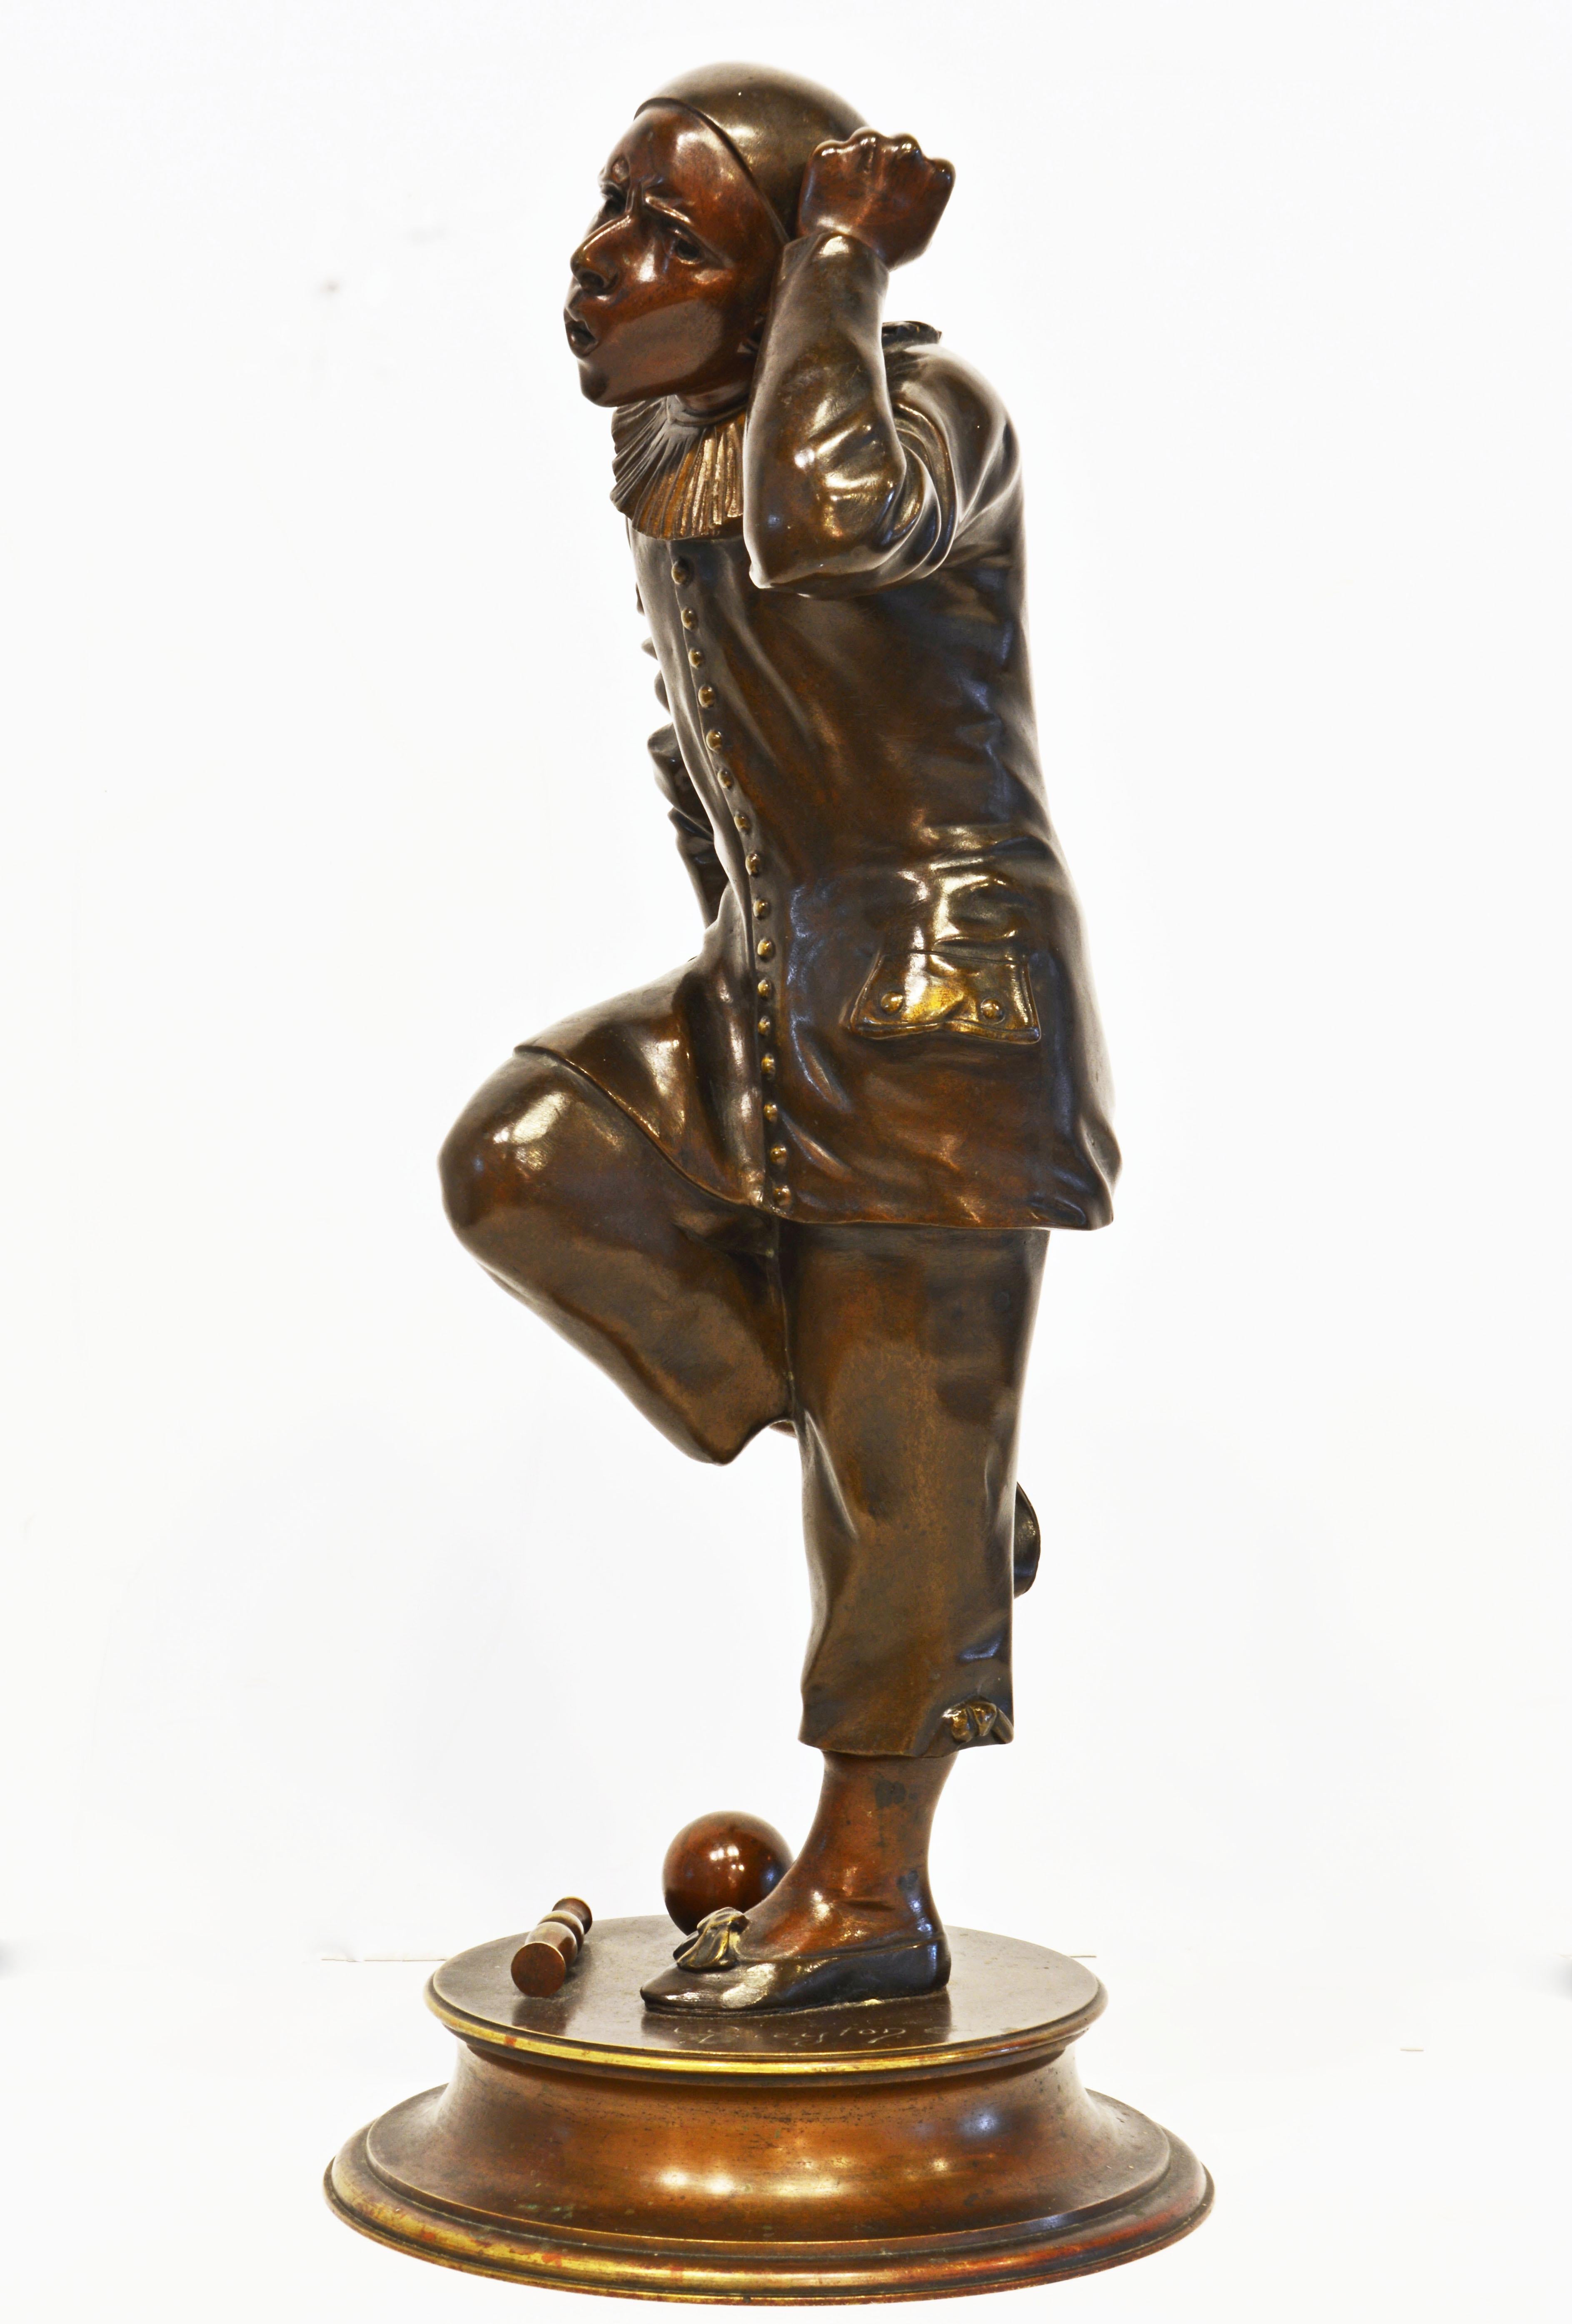 This fine and touching bronze figure of a jester in one of his traditional poses is by the French Sculptor G. Guyeton (1841-1919) and likely dates to around 1880. It is standing on a signed circular base presenting some of his 'tools of the trade'.